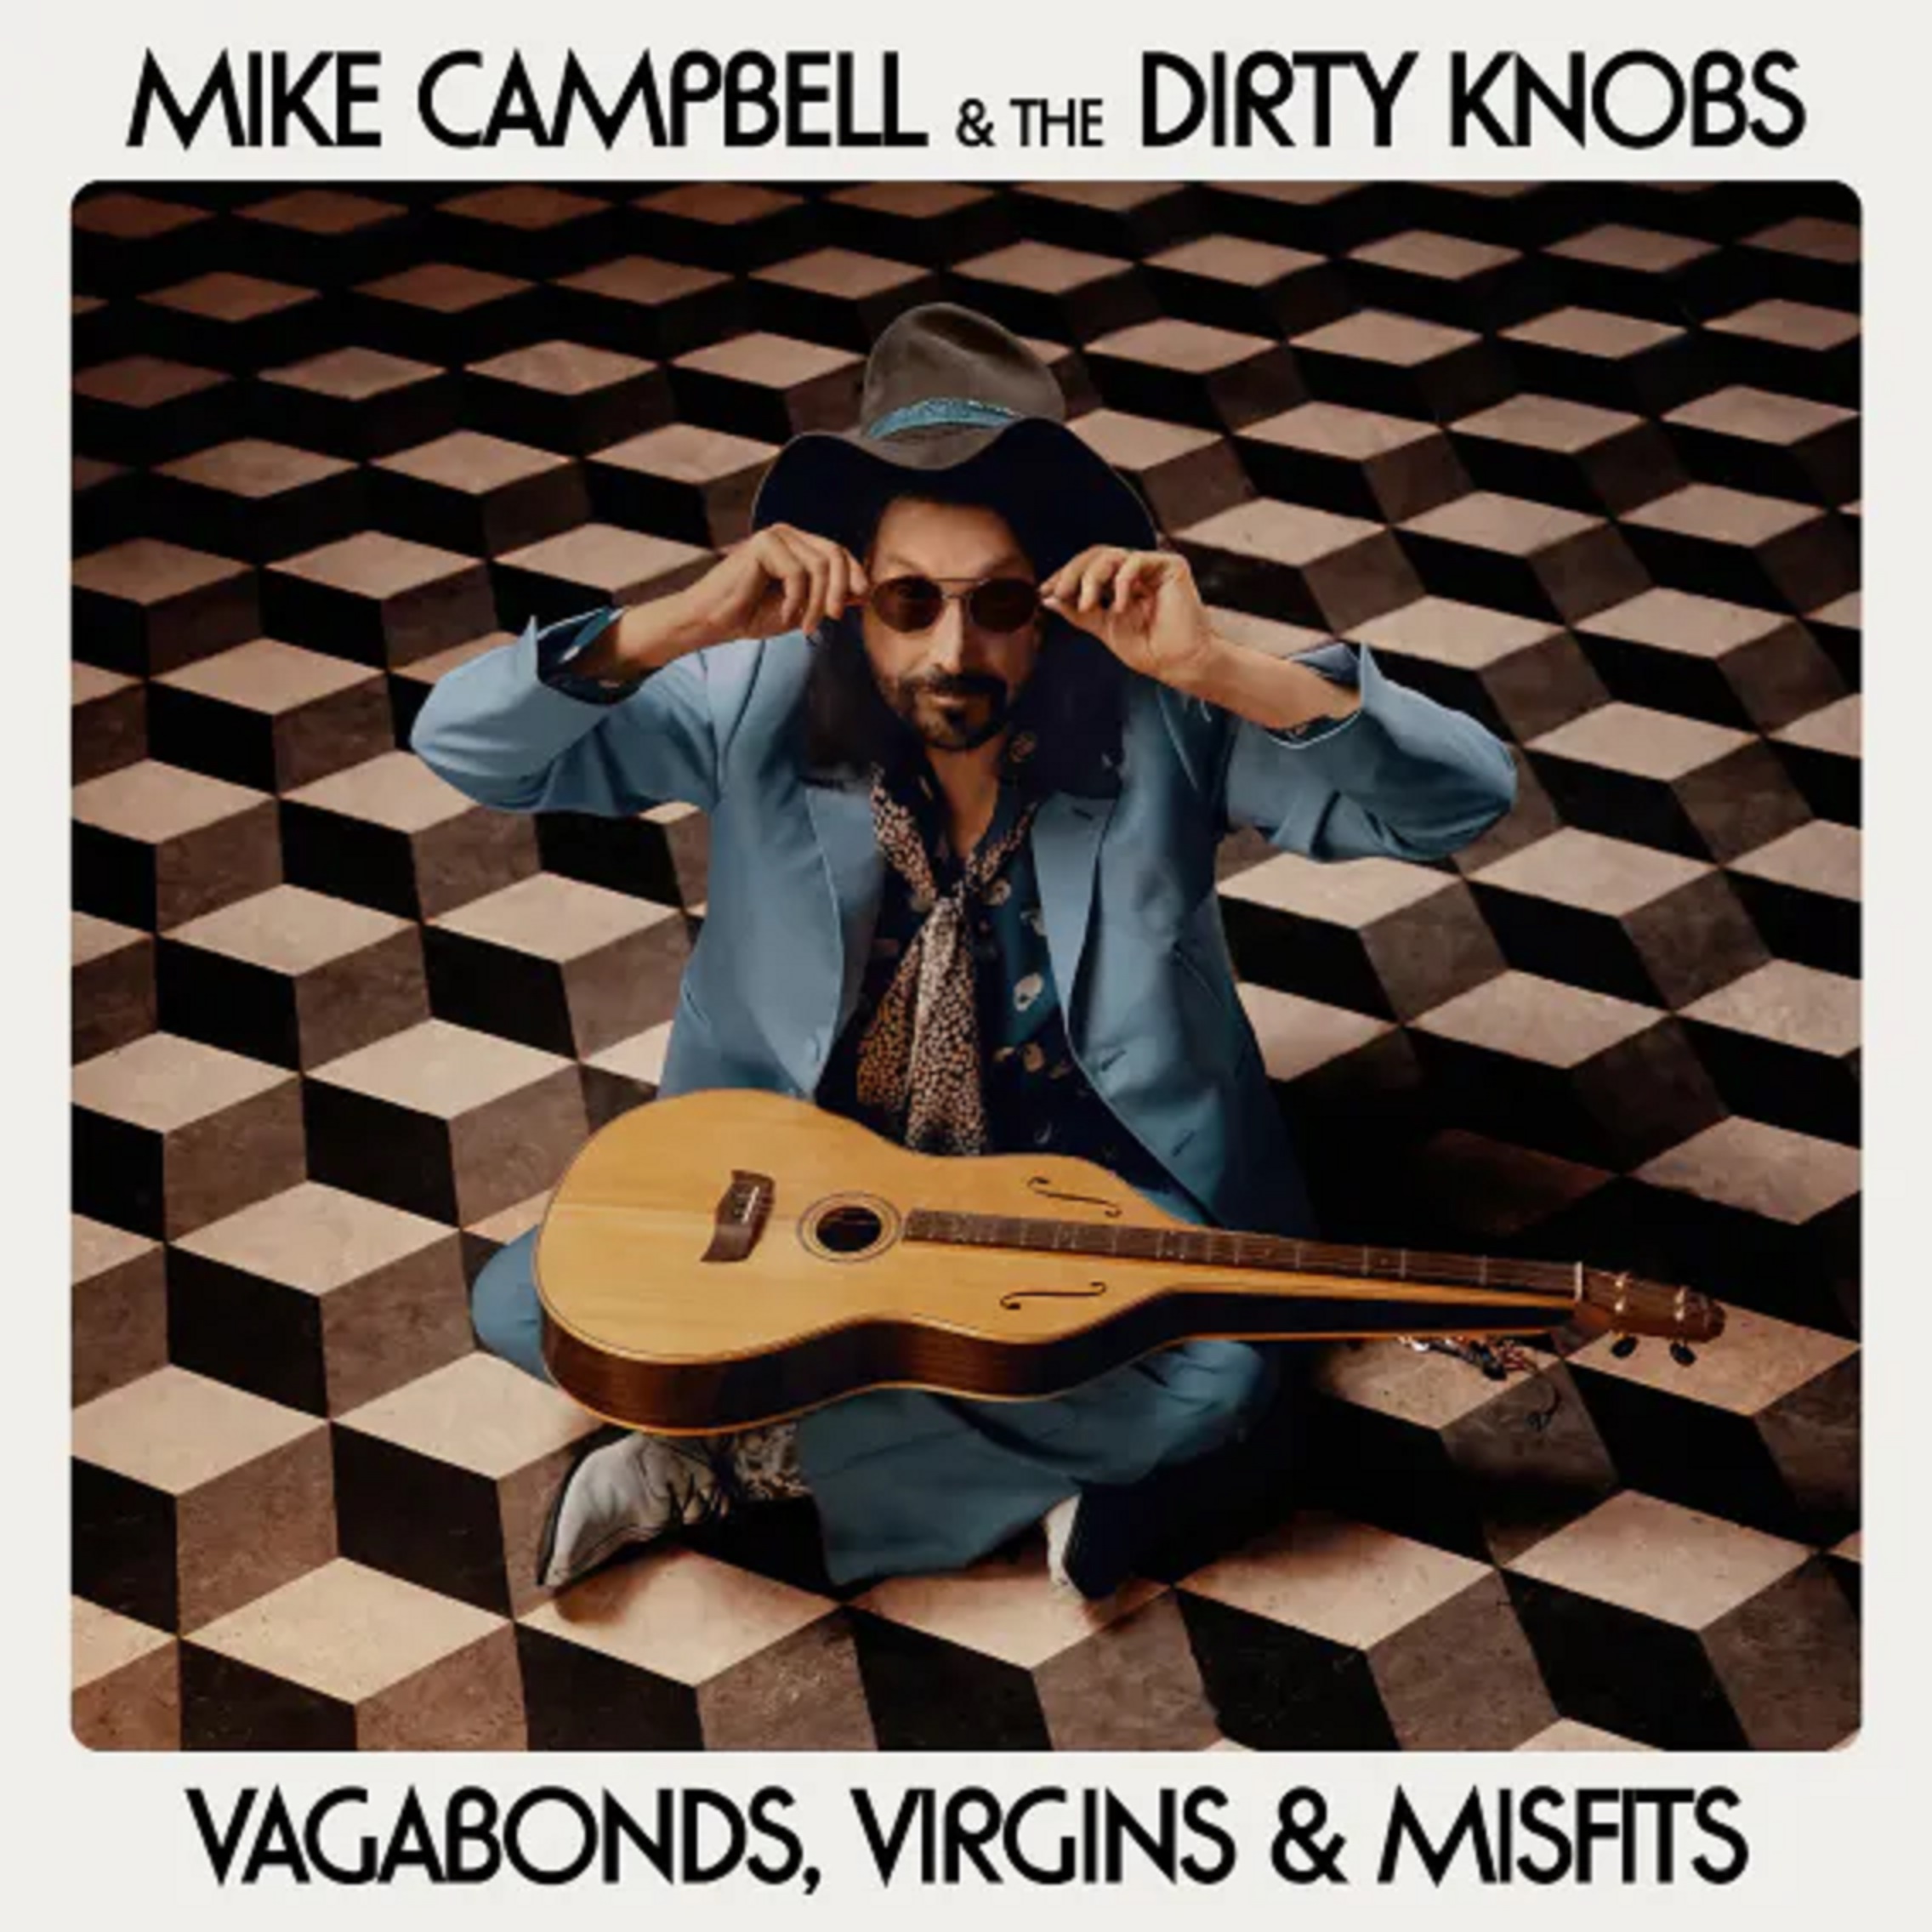 Mike Campbell & The Dirty Knobs debut new single "Angel of Mercy;" upcoming album "Vagabonds, Virgins & Misfits" due 6/14